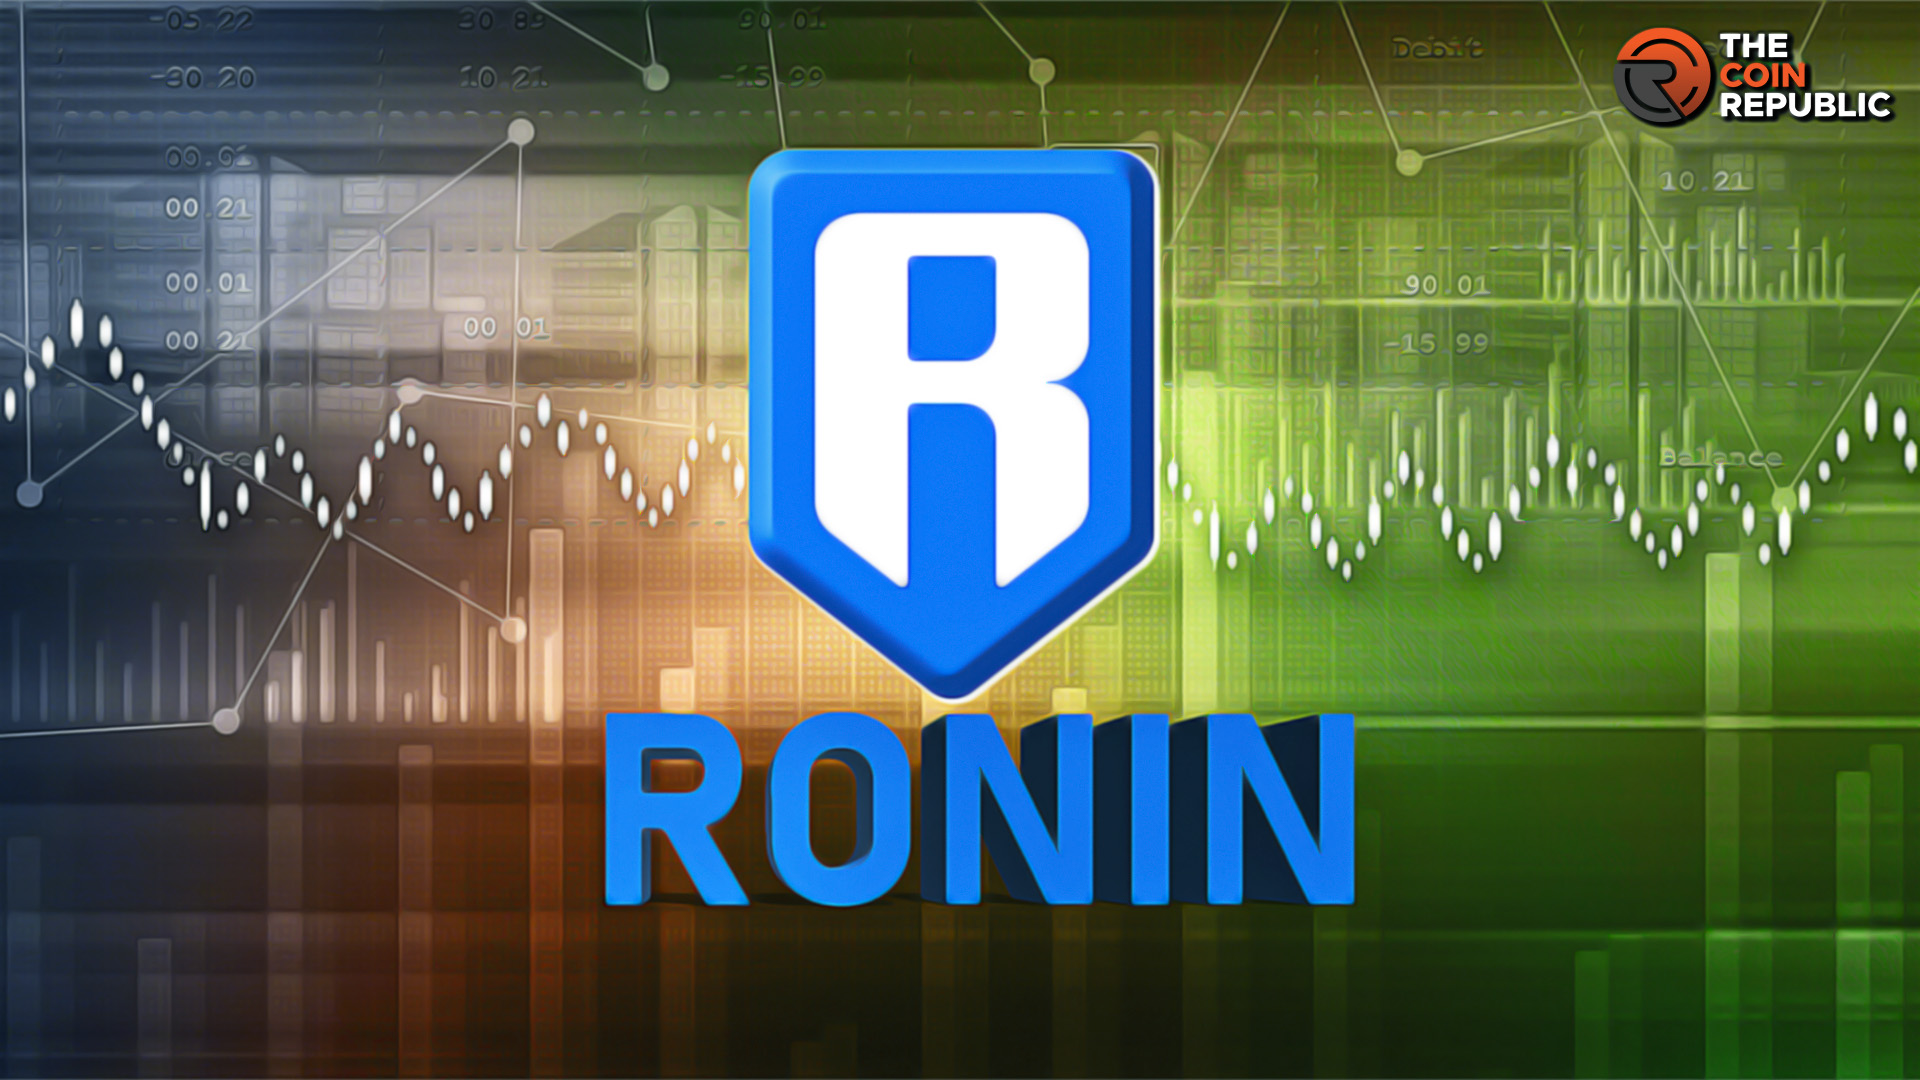 Ronin Price (RON) Forecast: A Breakout Opportunity in Sight!